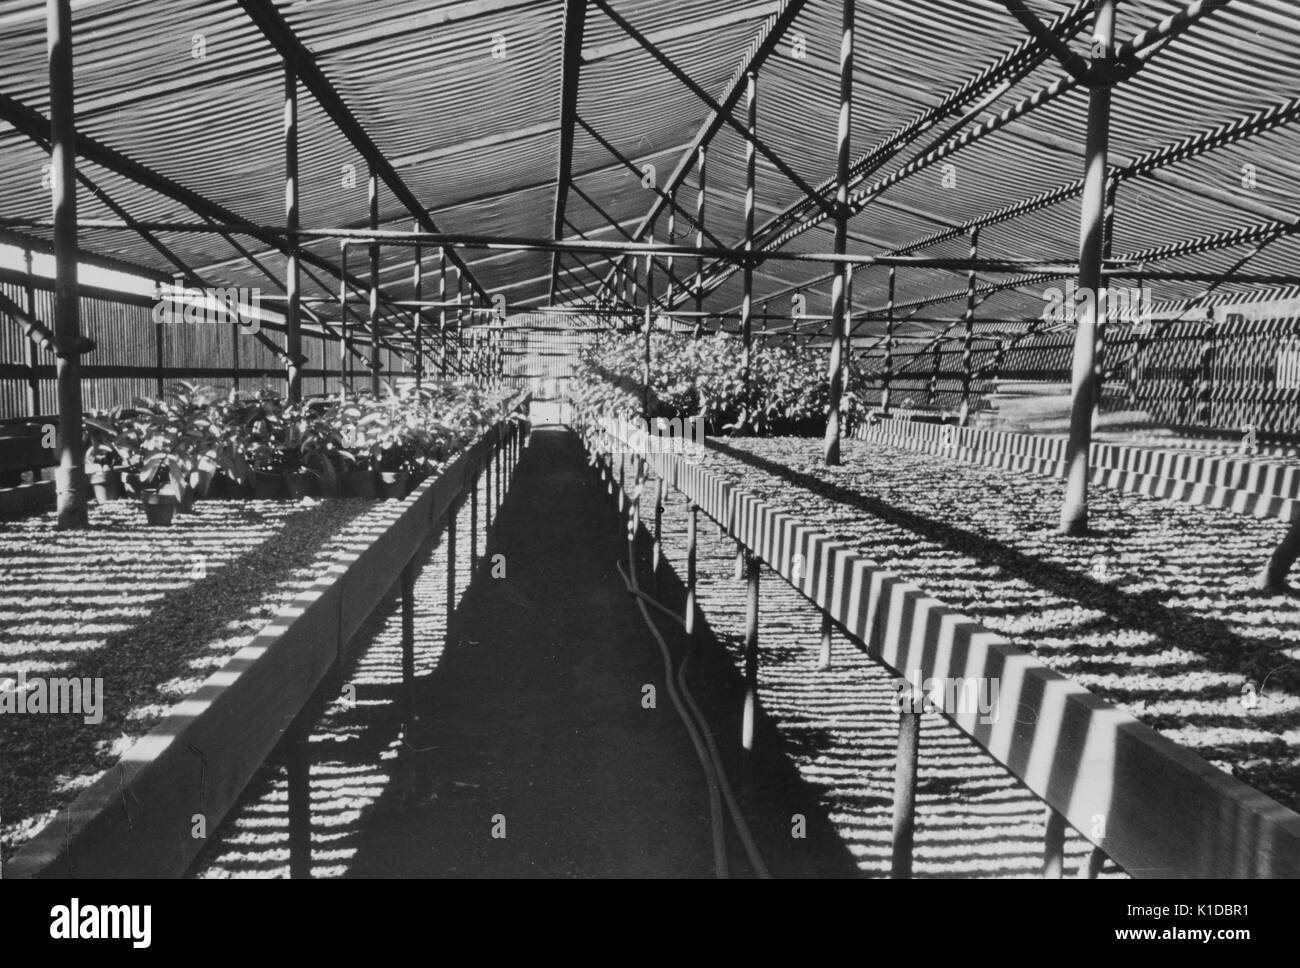 Rows of planters in a greenhouse at the United States Department of Agriculture experimental farm, Beltsville, Maryland, 1935. From the New York Public Library. Stock Photo